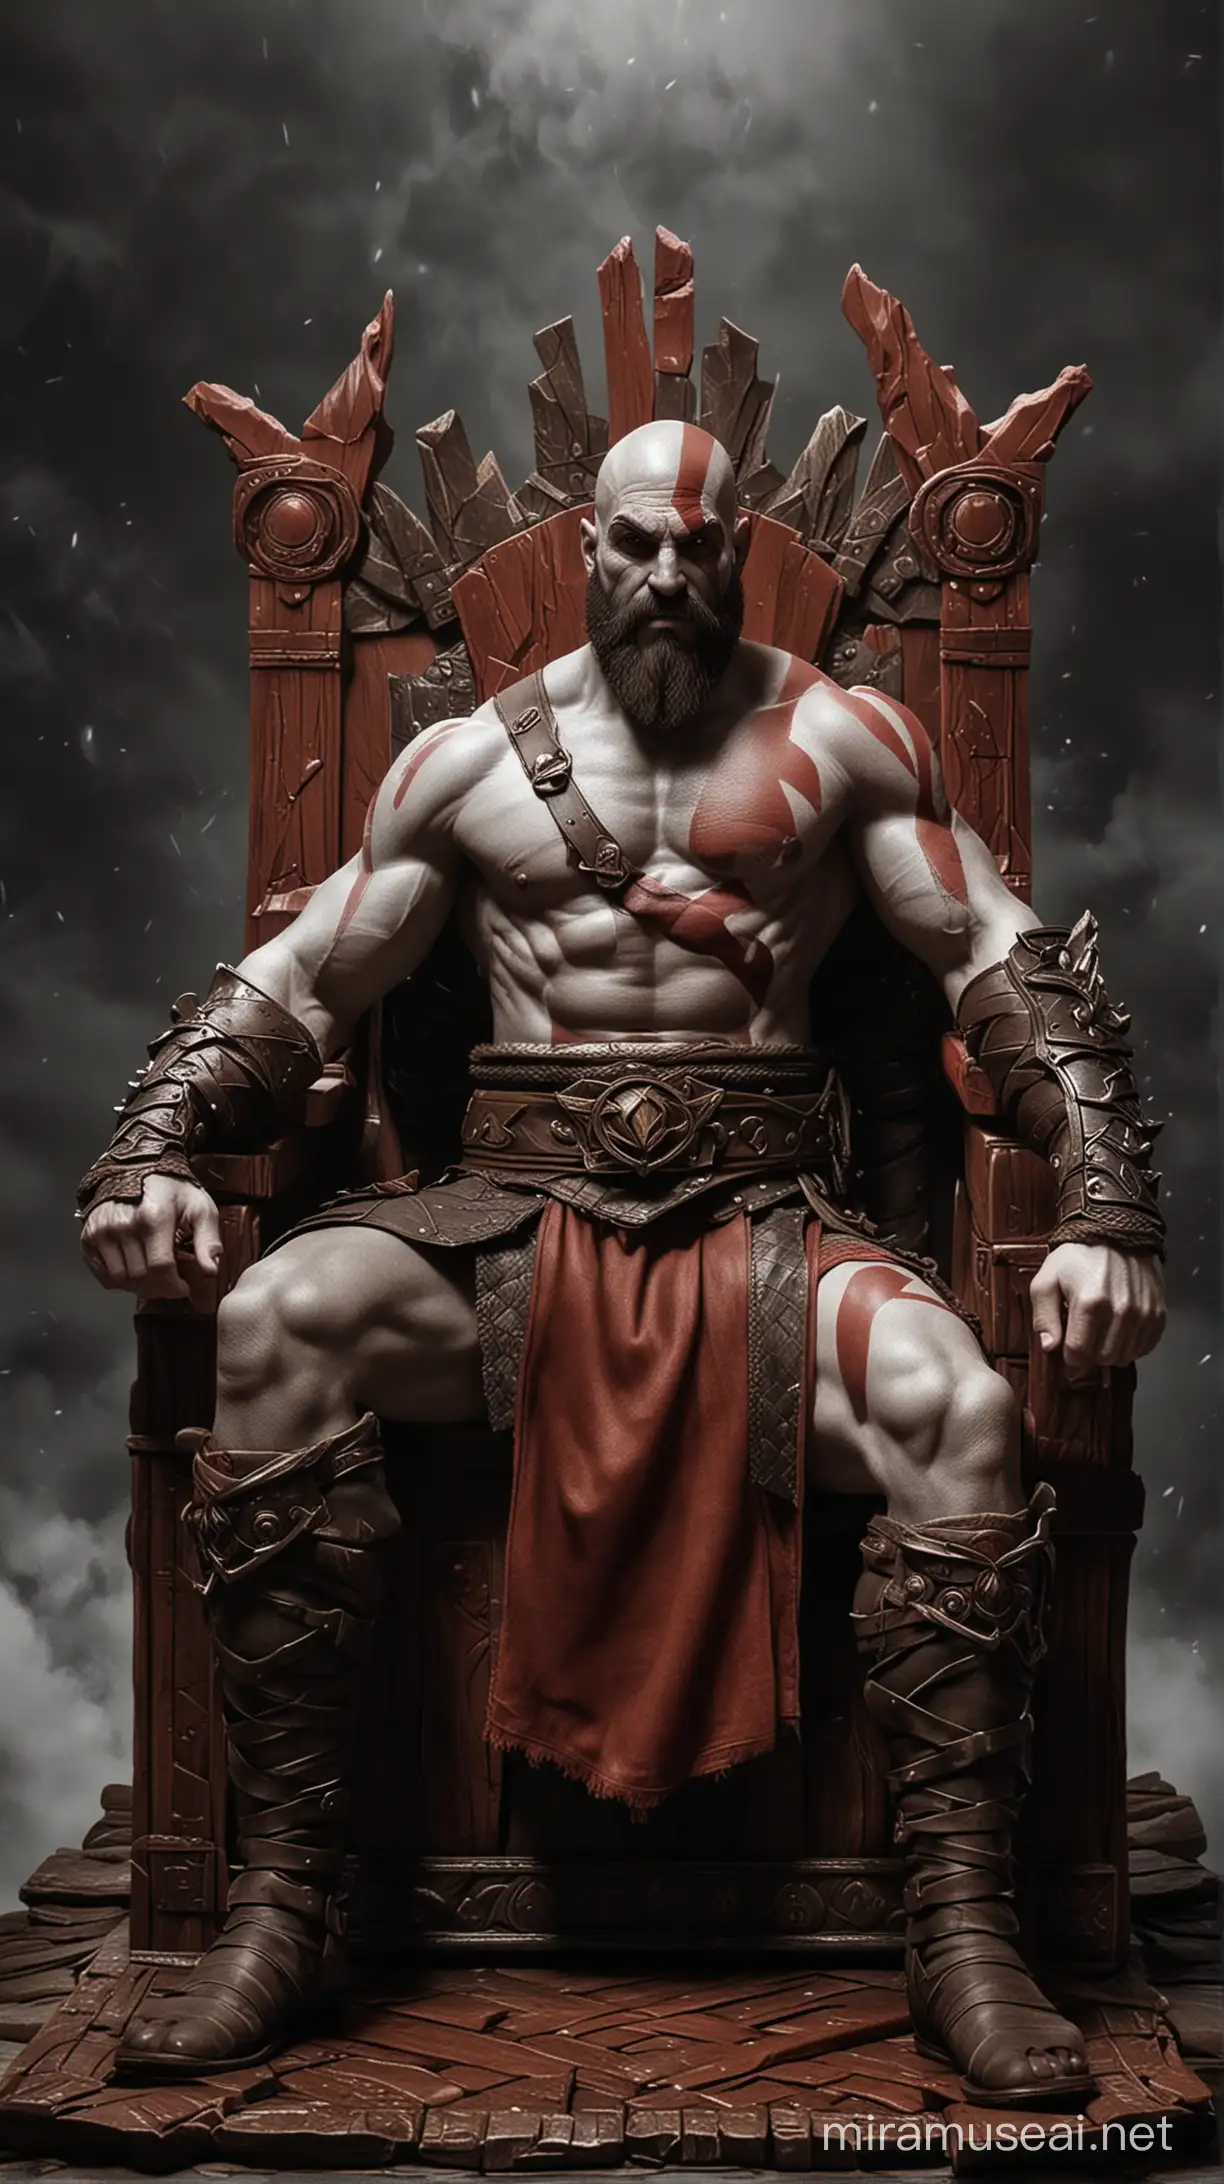 Majestic Kratos Sitting on His Throne in Commanding Pose